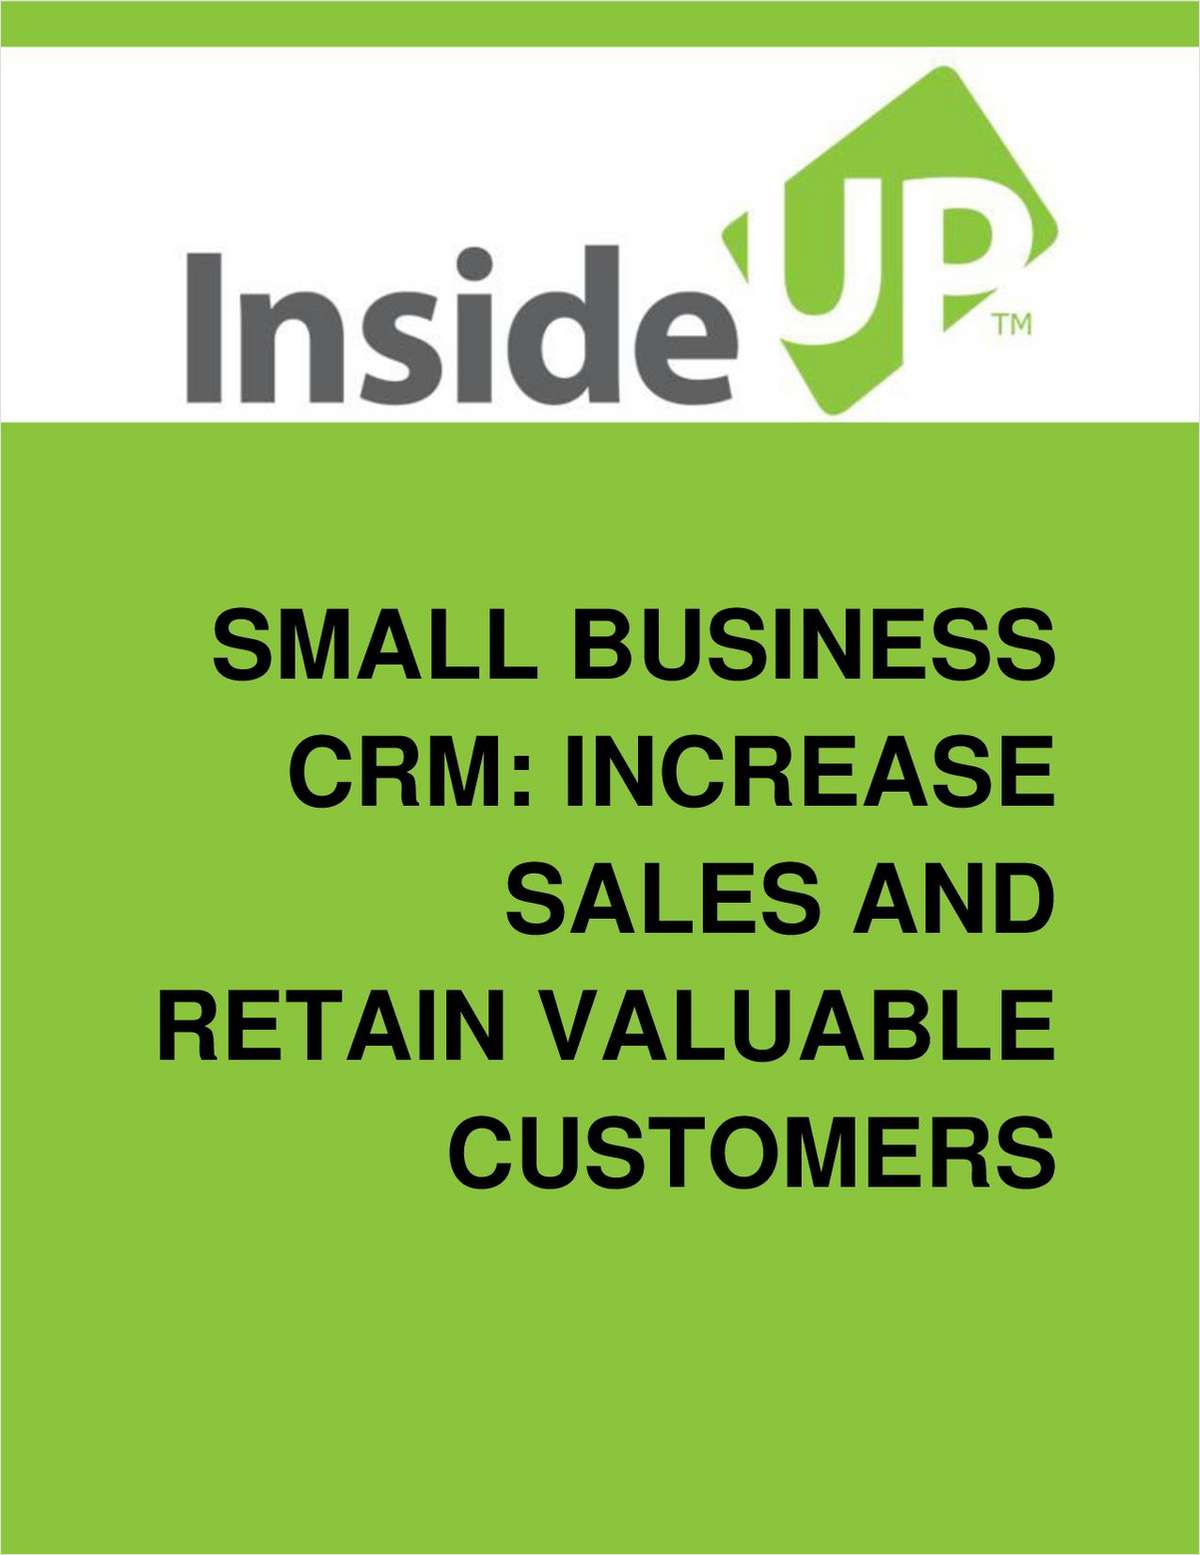 Small Business CRM Systems: How To Increase Sales And Retain Valuable Customers